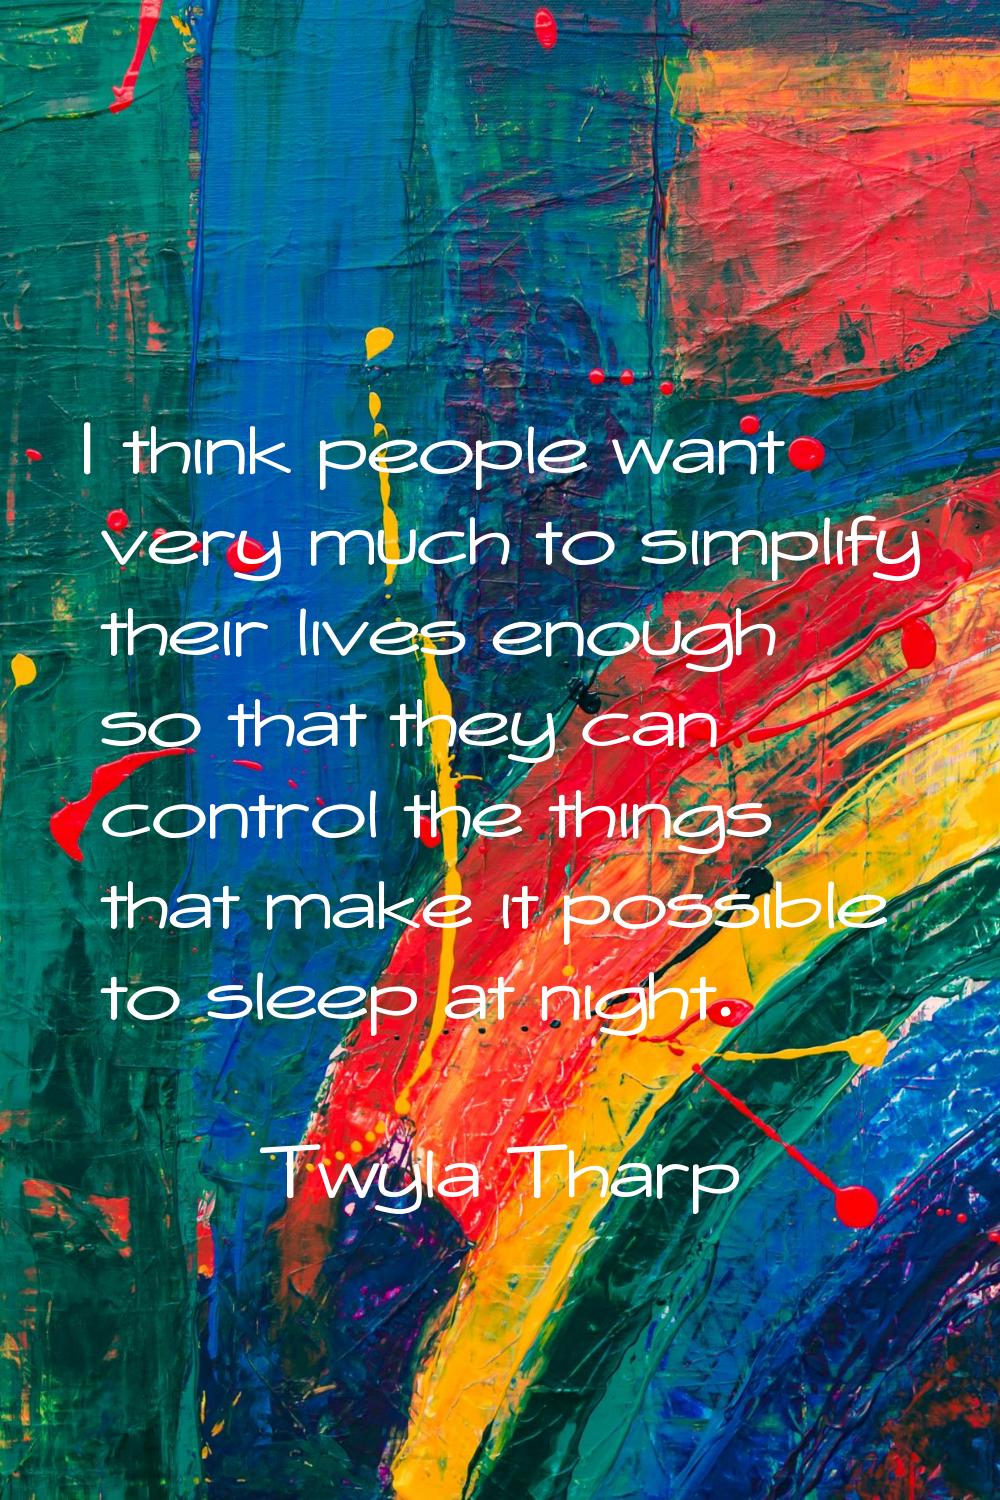 I think people want very much to simplify their lives enough so that they can control the things th